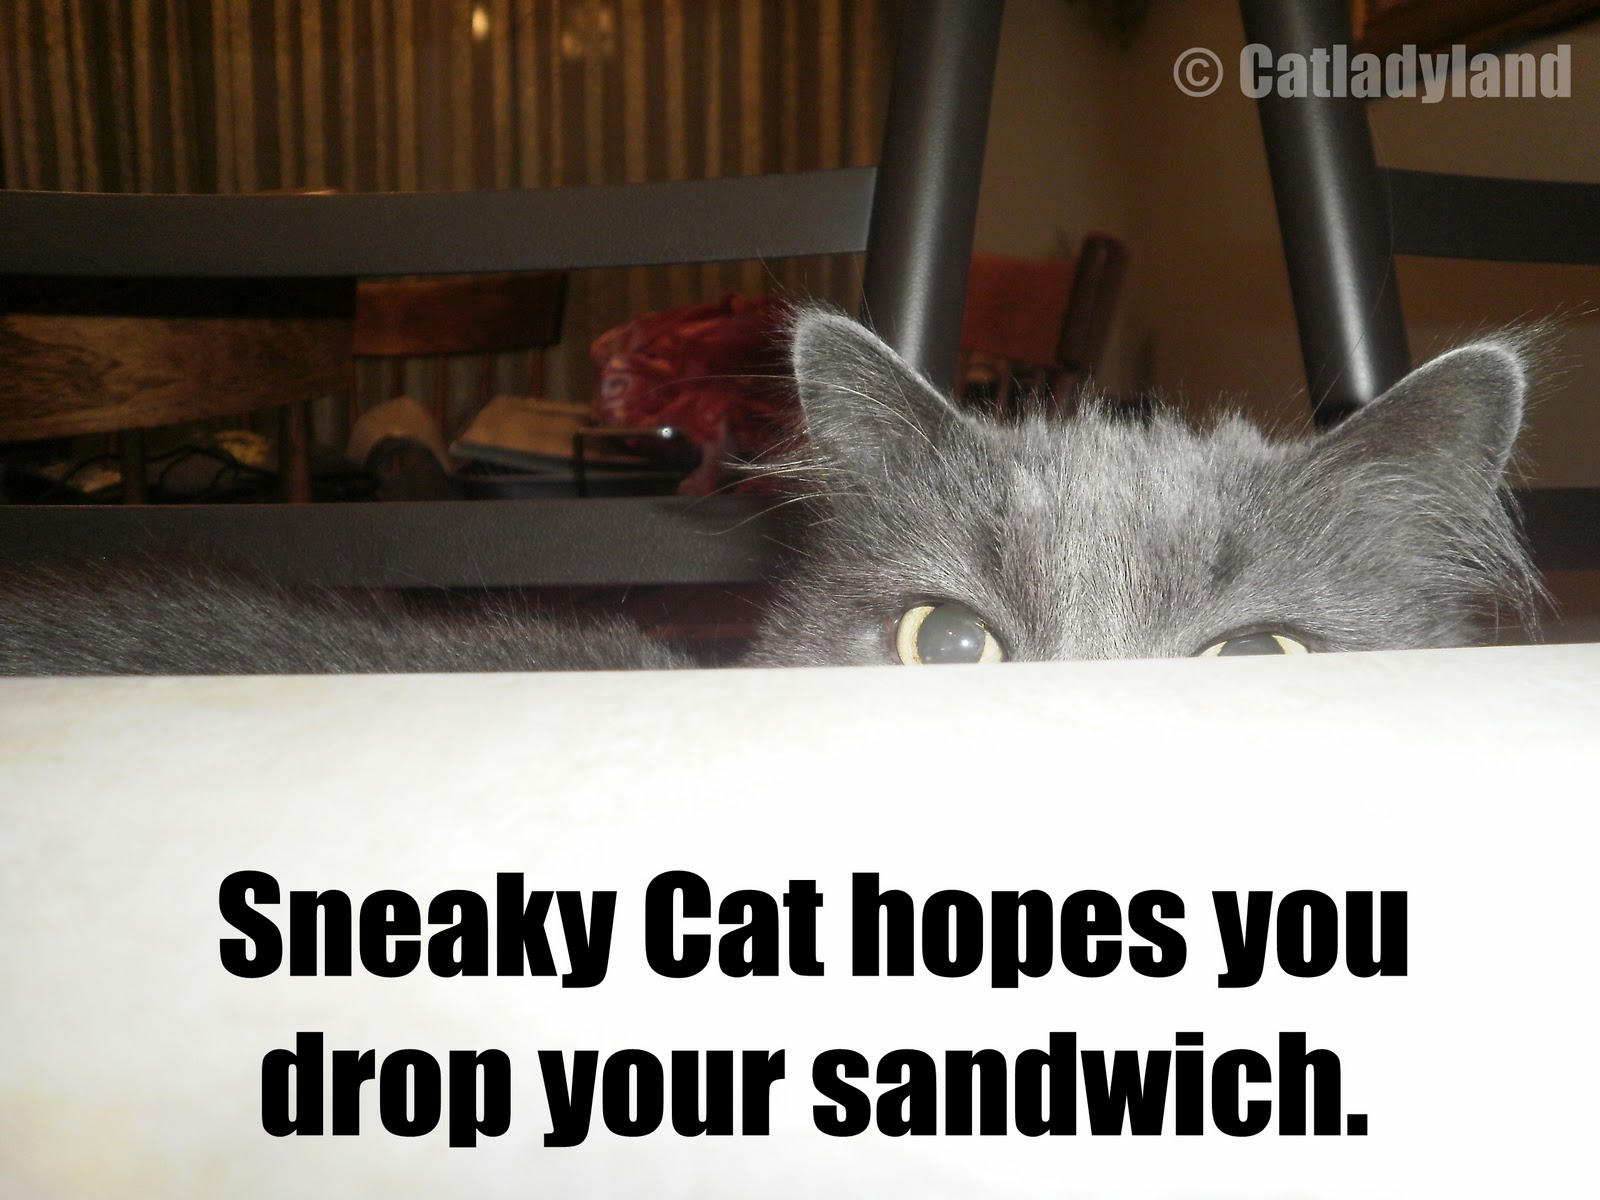 Catladyland: Cats are Funny: Sneaky Peeky!